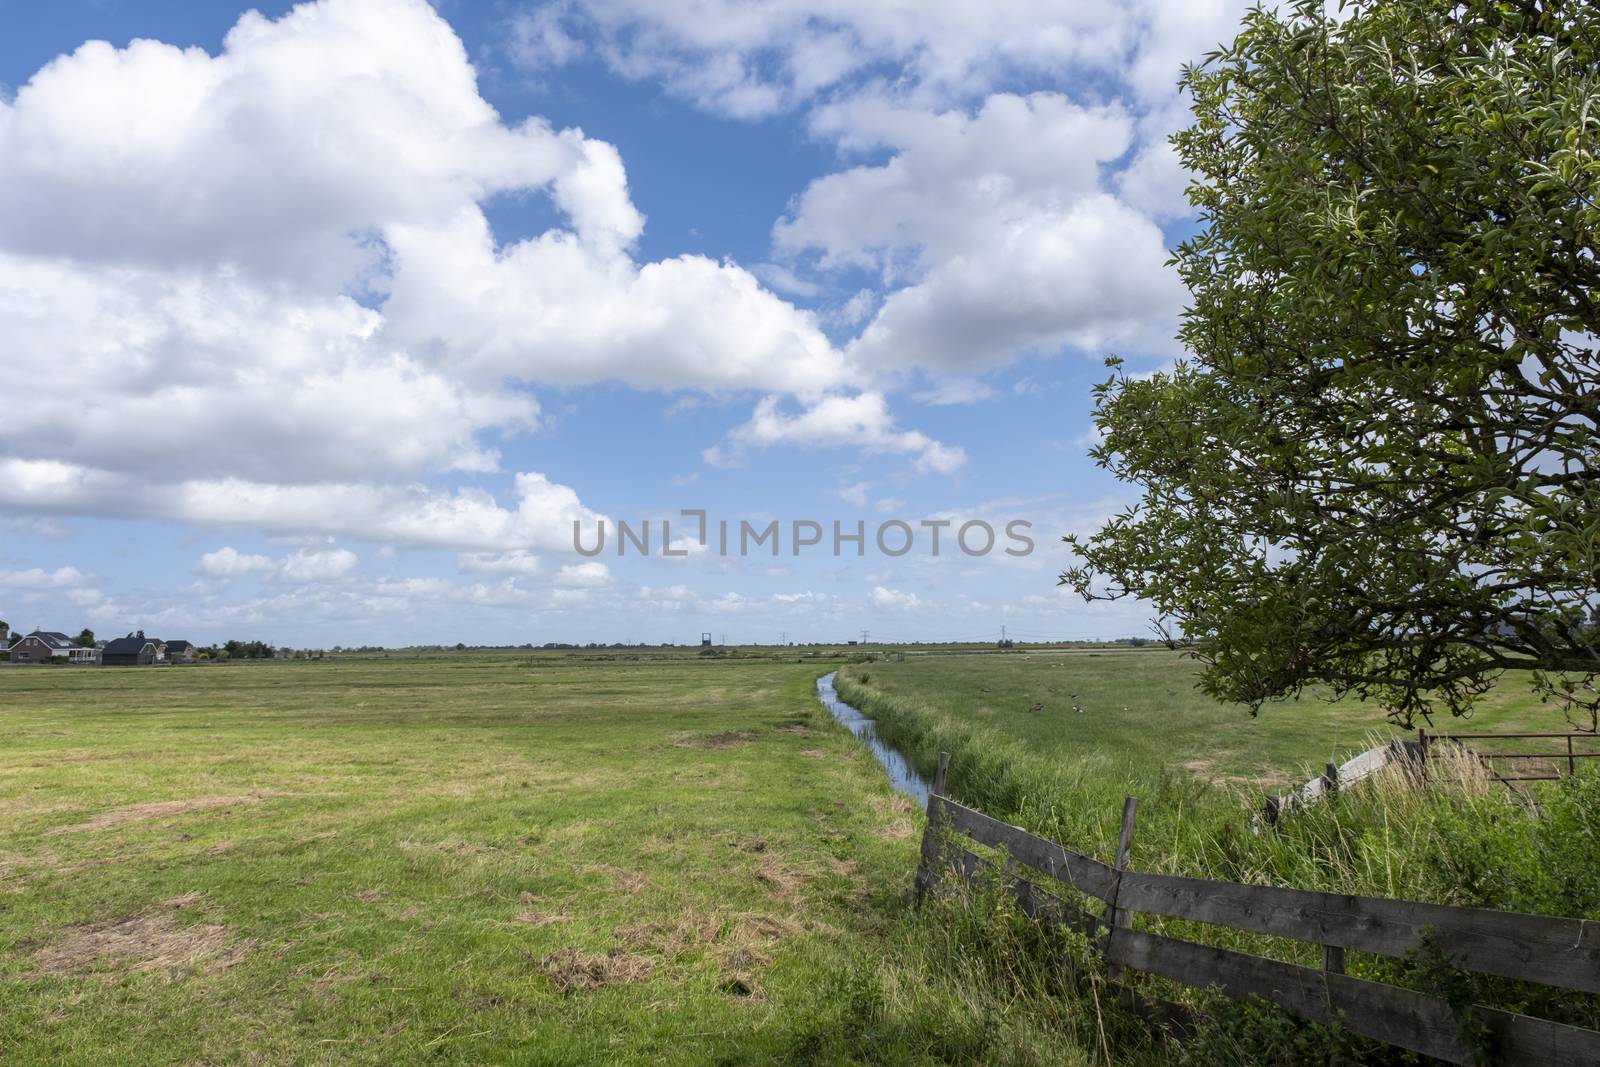 Dutch polder landscape early in the morning on a sunny day in the spring season by Tjeerdkruse